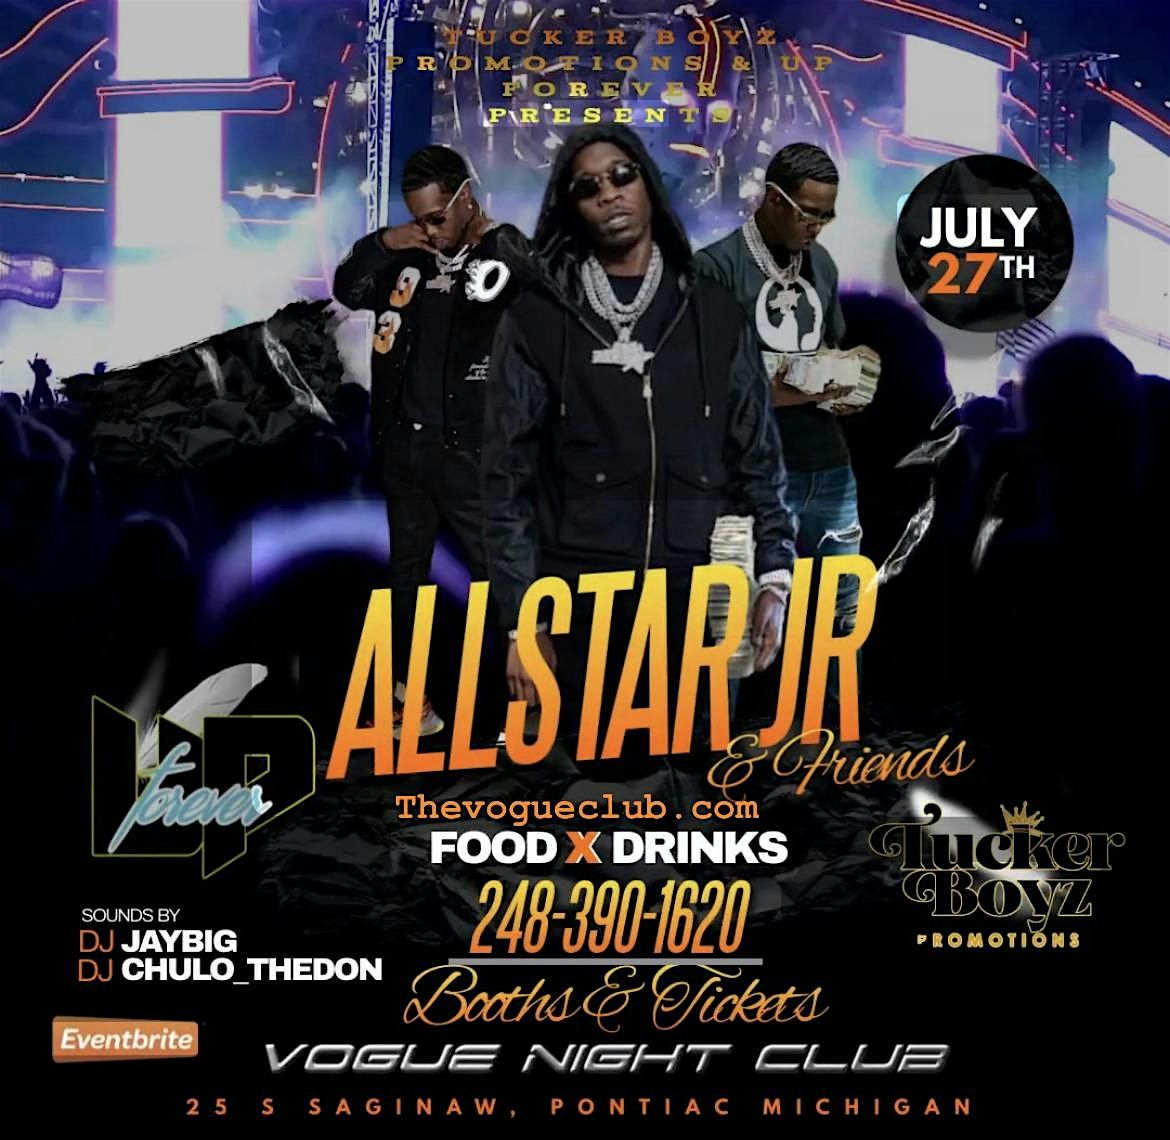 All star JR &Friends Live concert & Fight watch party